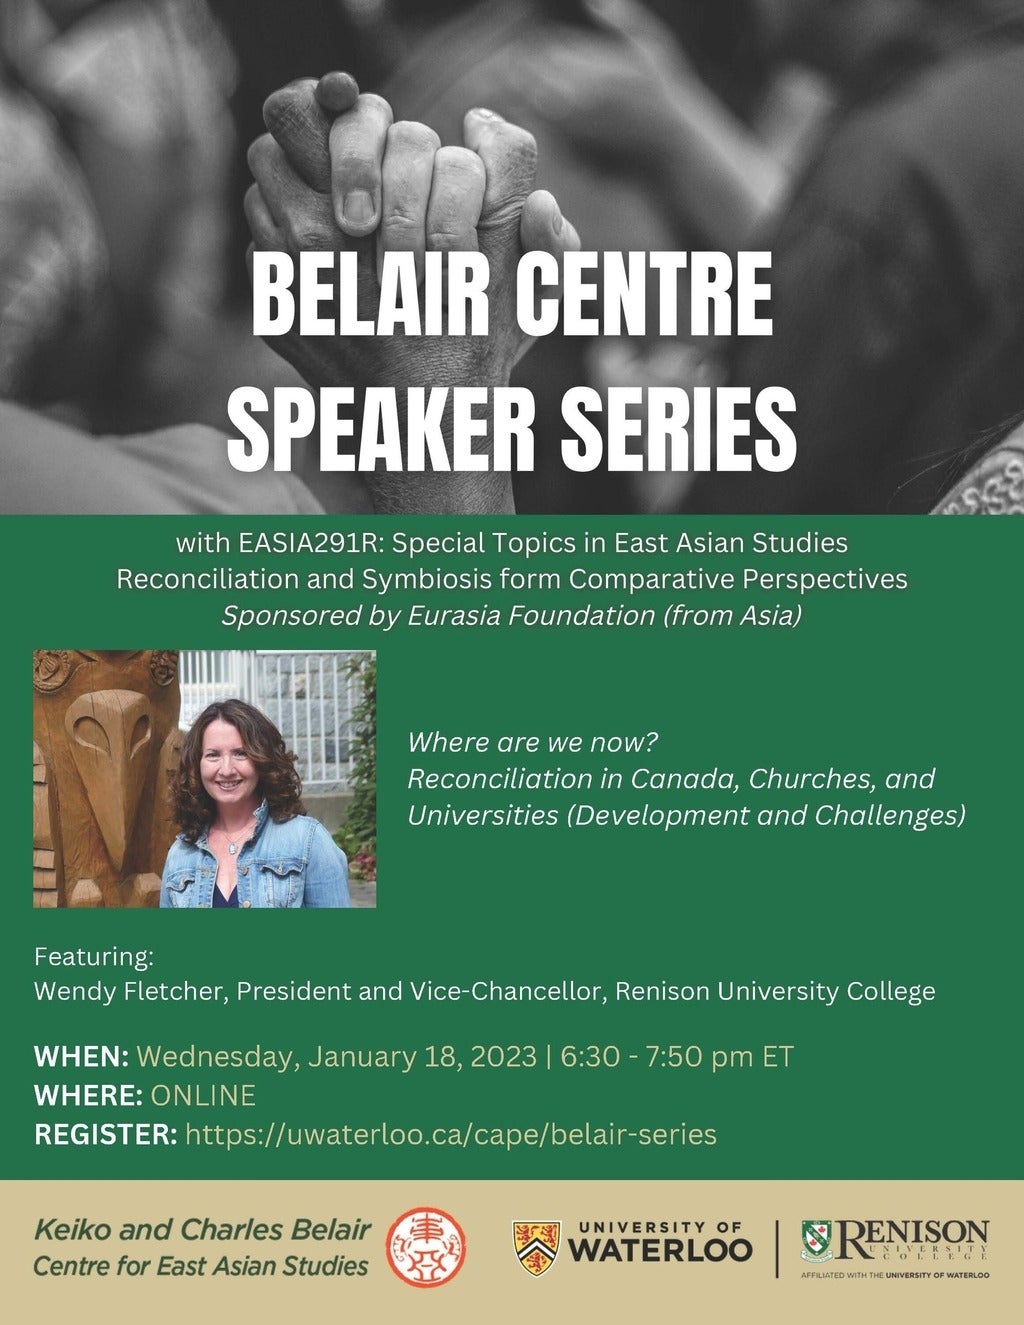 Belair Centre Speaker Series: Where are we now? Reconciliation in Canada, Churches, and Universities